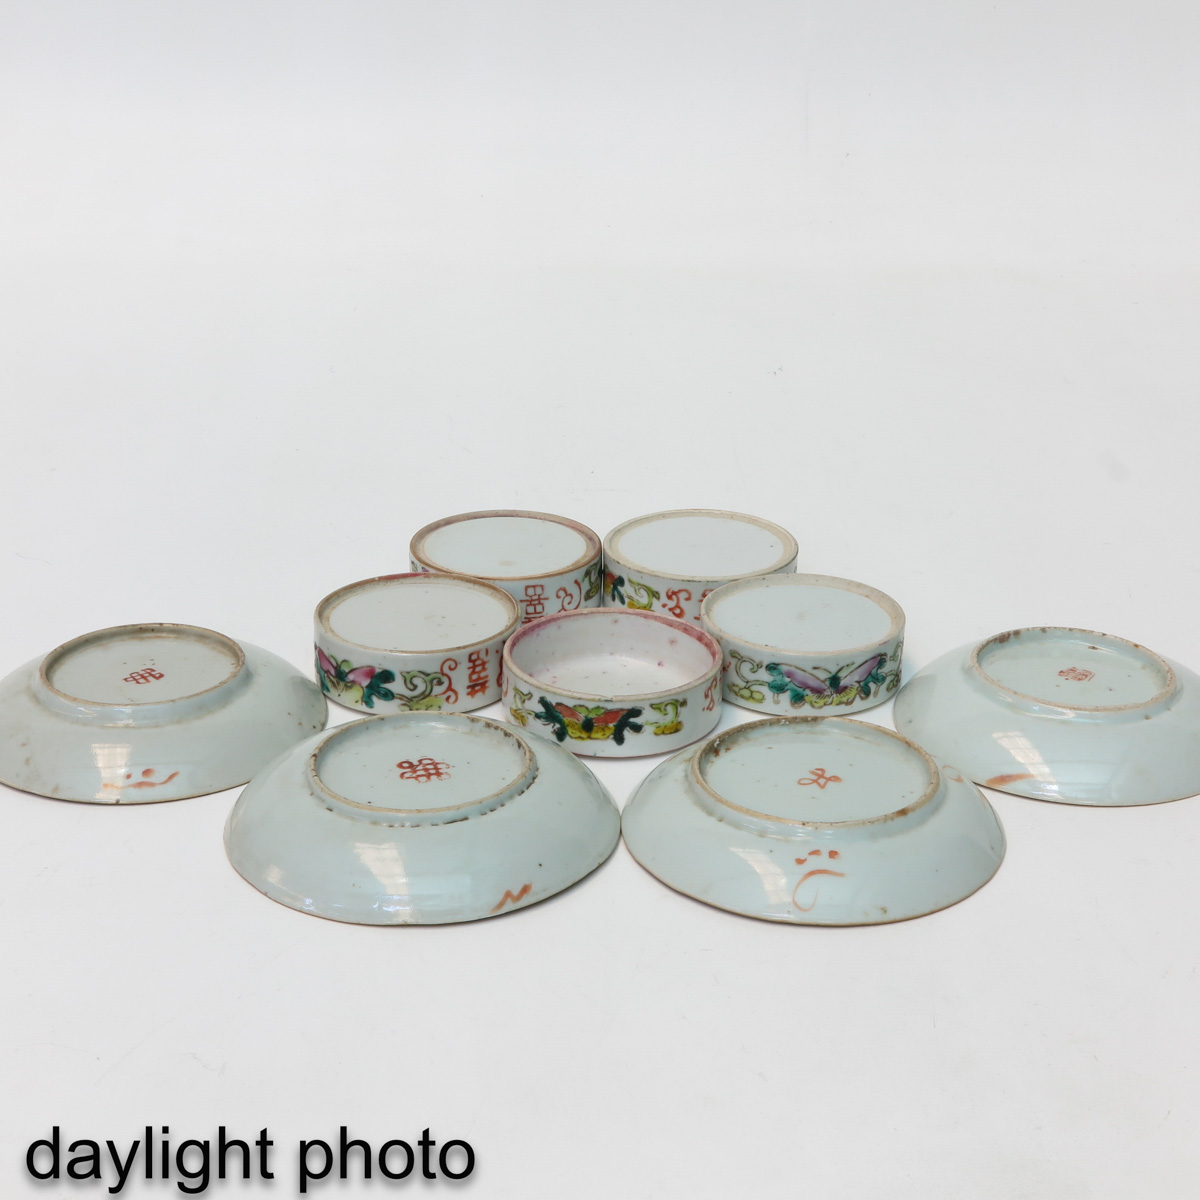 A Collection of Famille Rose Porcelain - Image 10 of 10